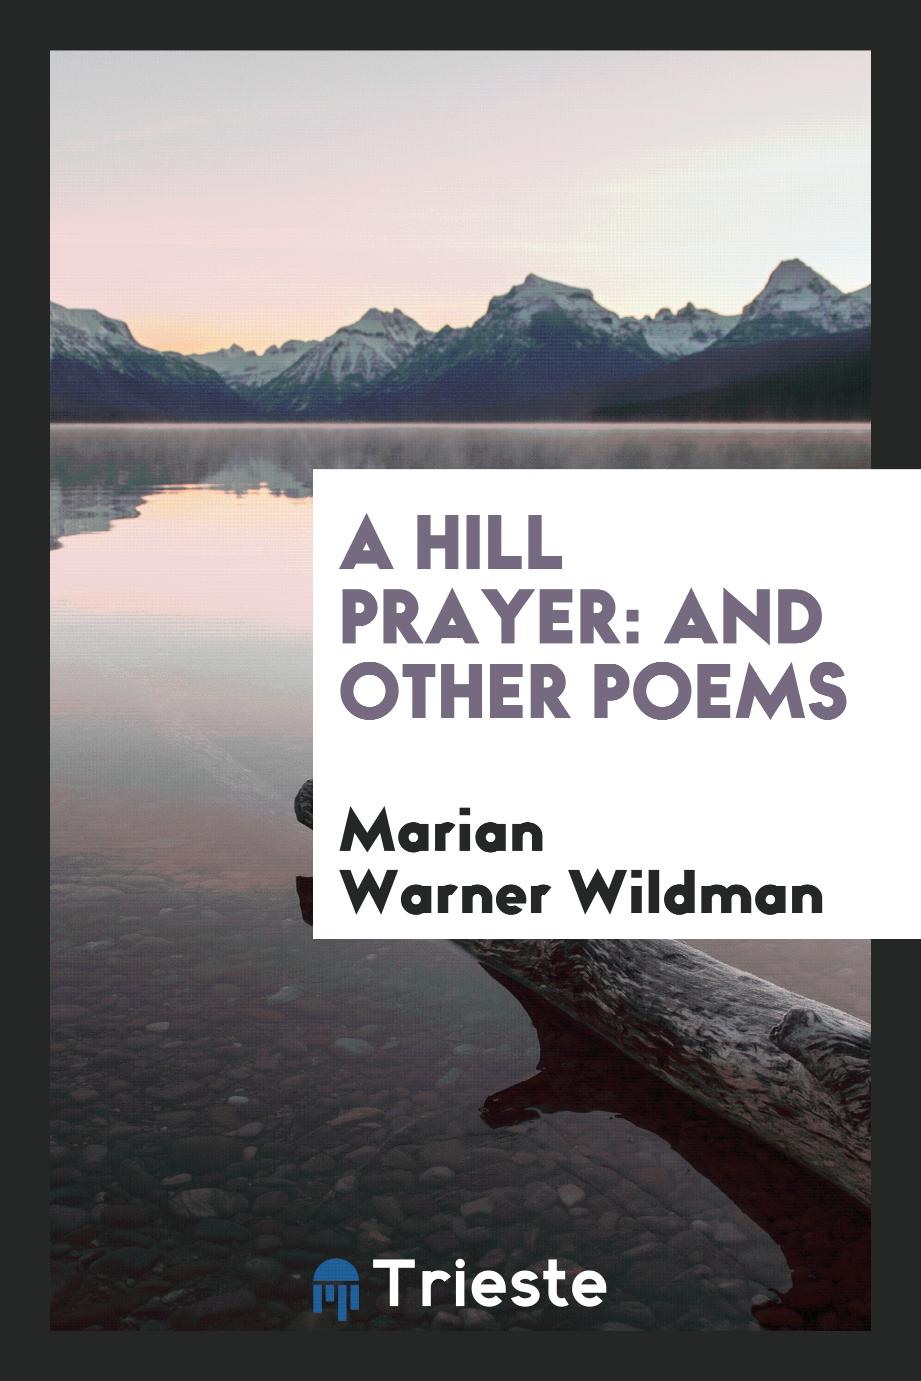 A Hill Prayer: And Other Poems